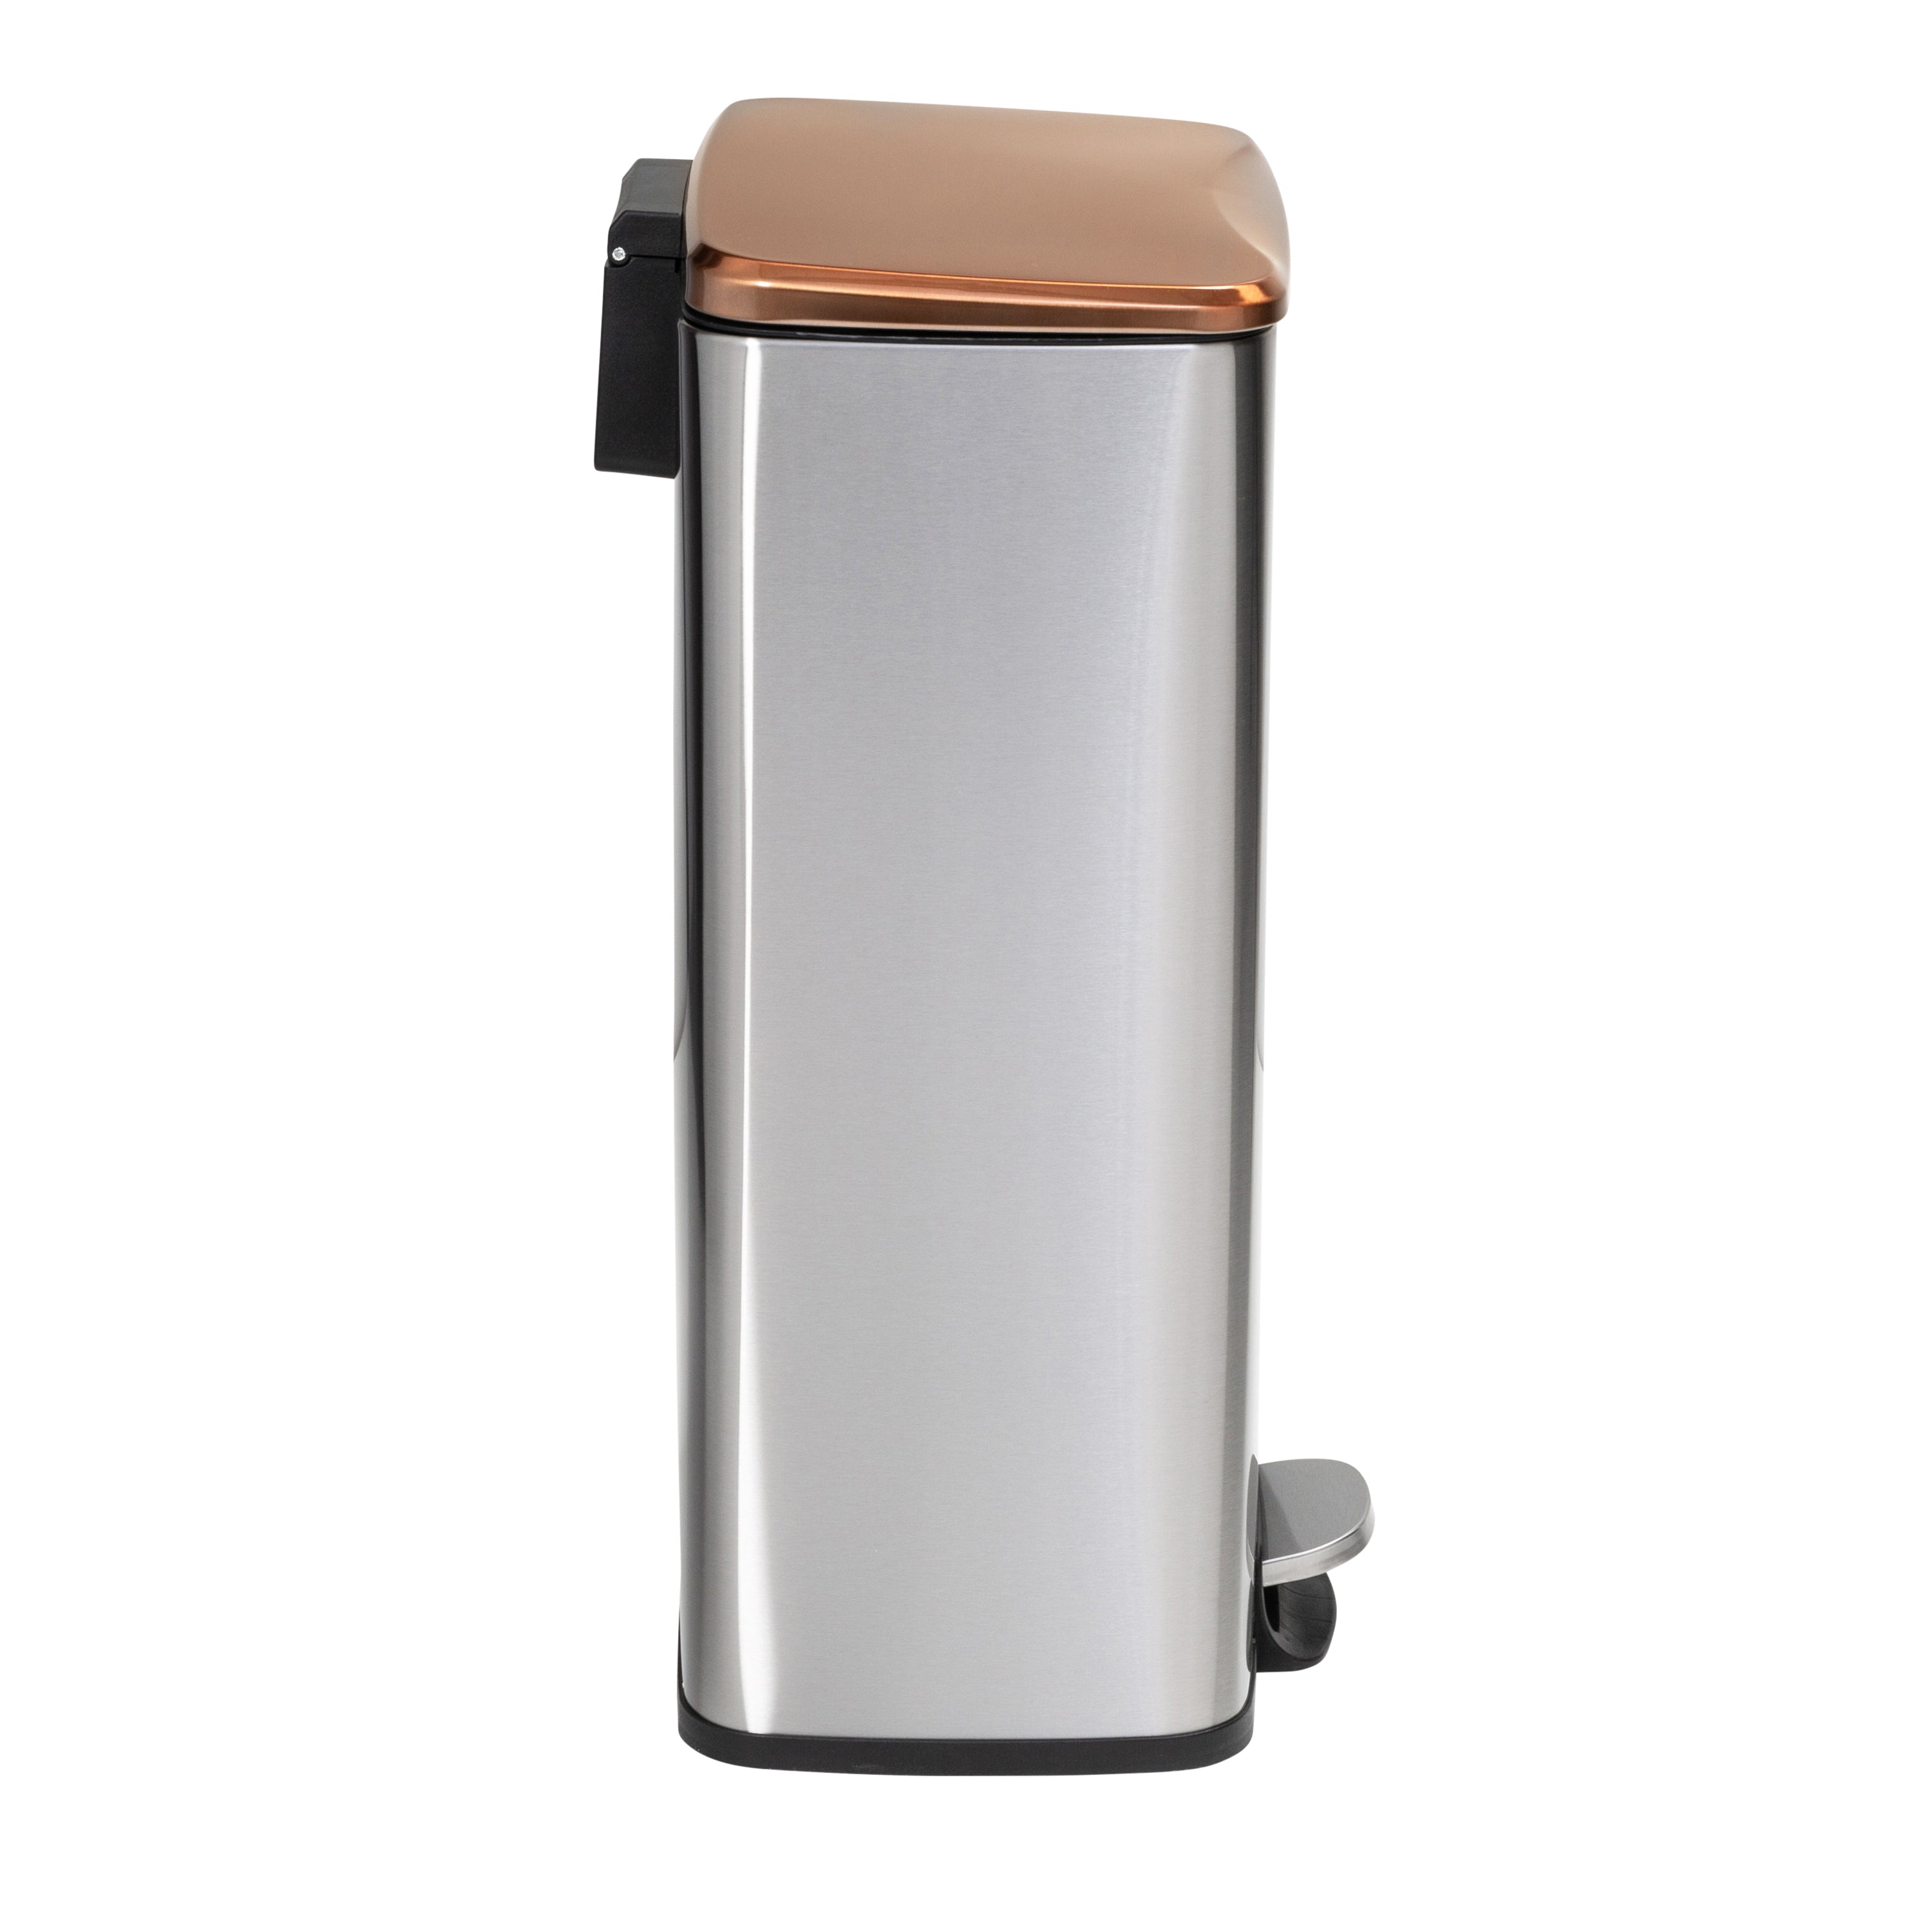 Honey-Can-Do 30L Soft Close Stainless Steel Step Trash Can